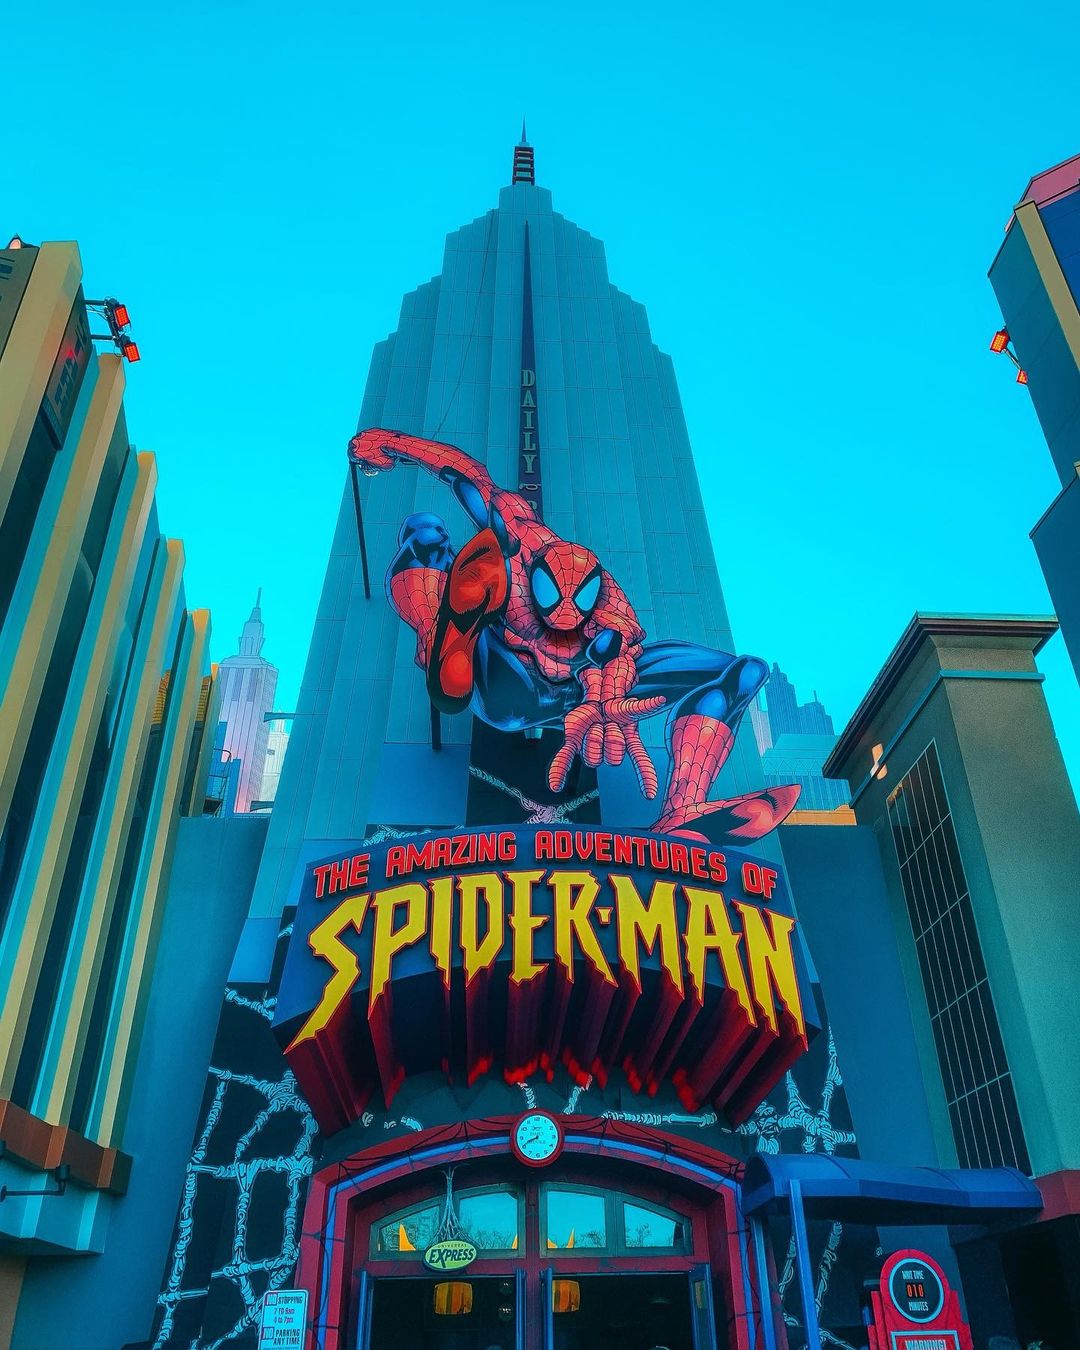 Spiderman attraction at Islands of Adventure